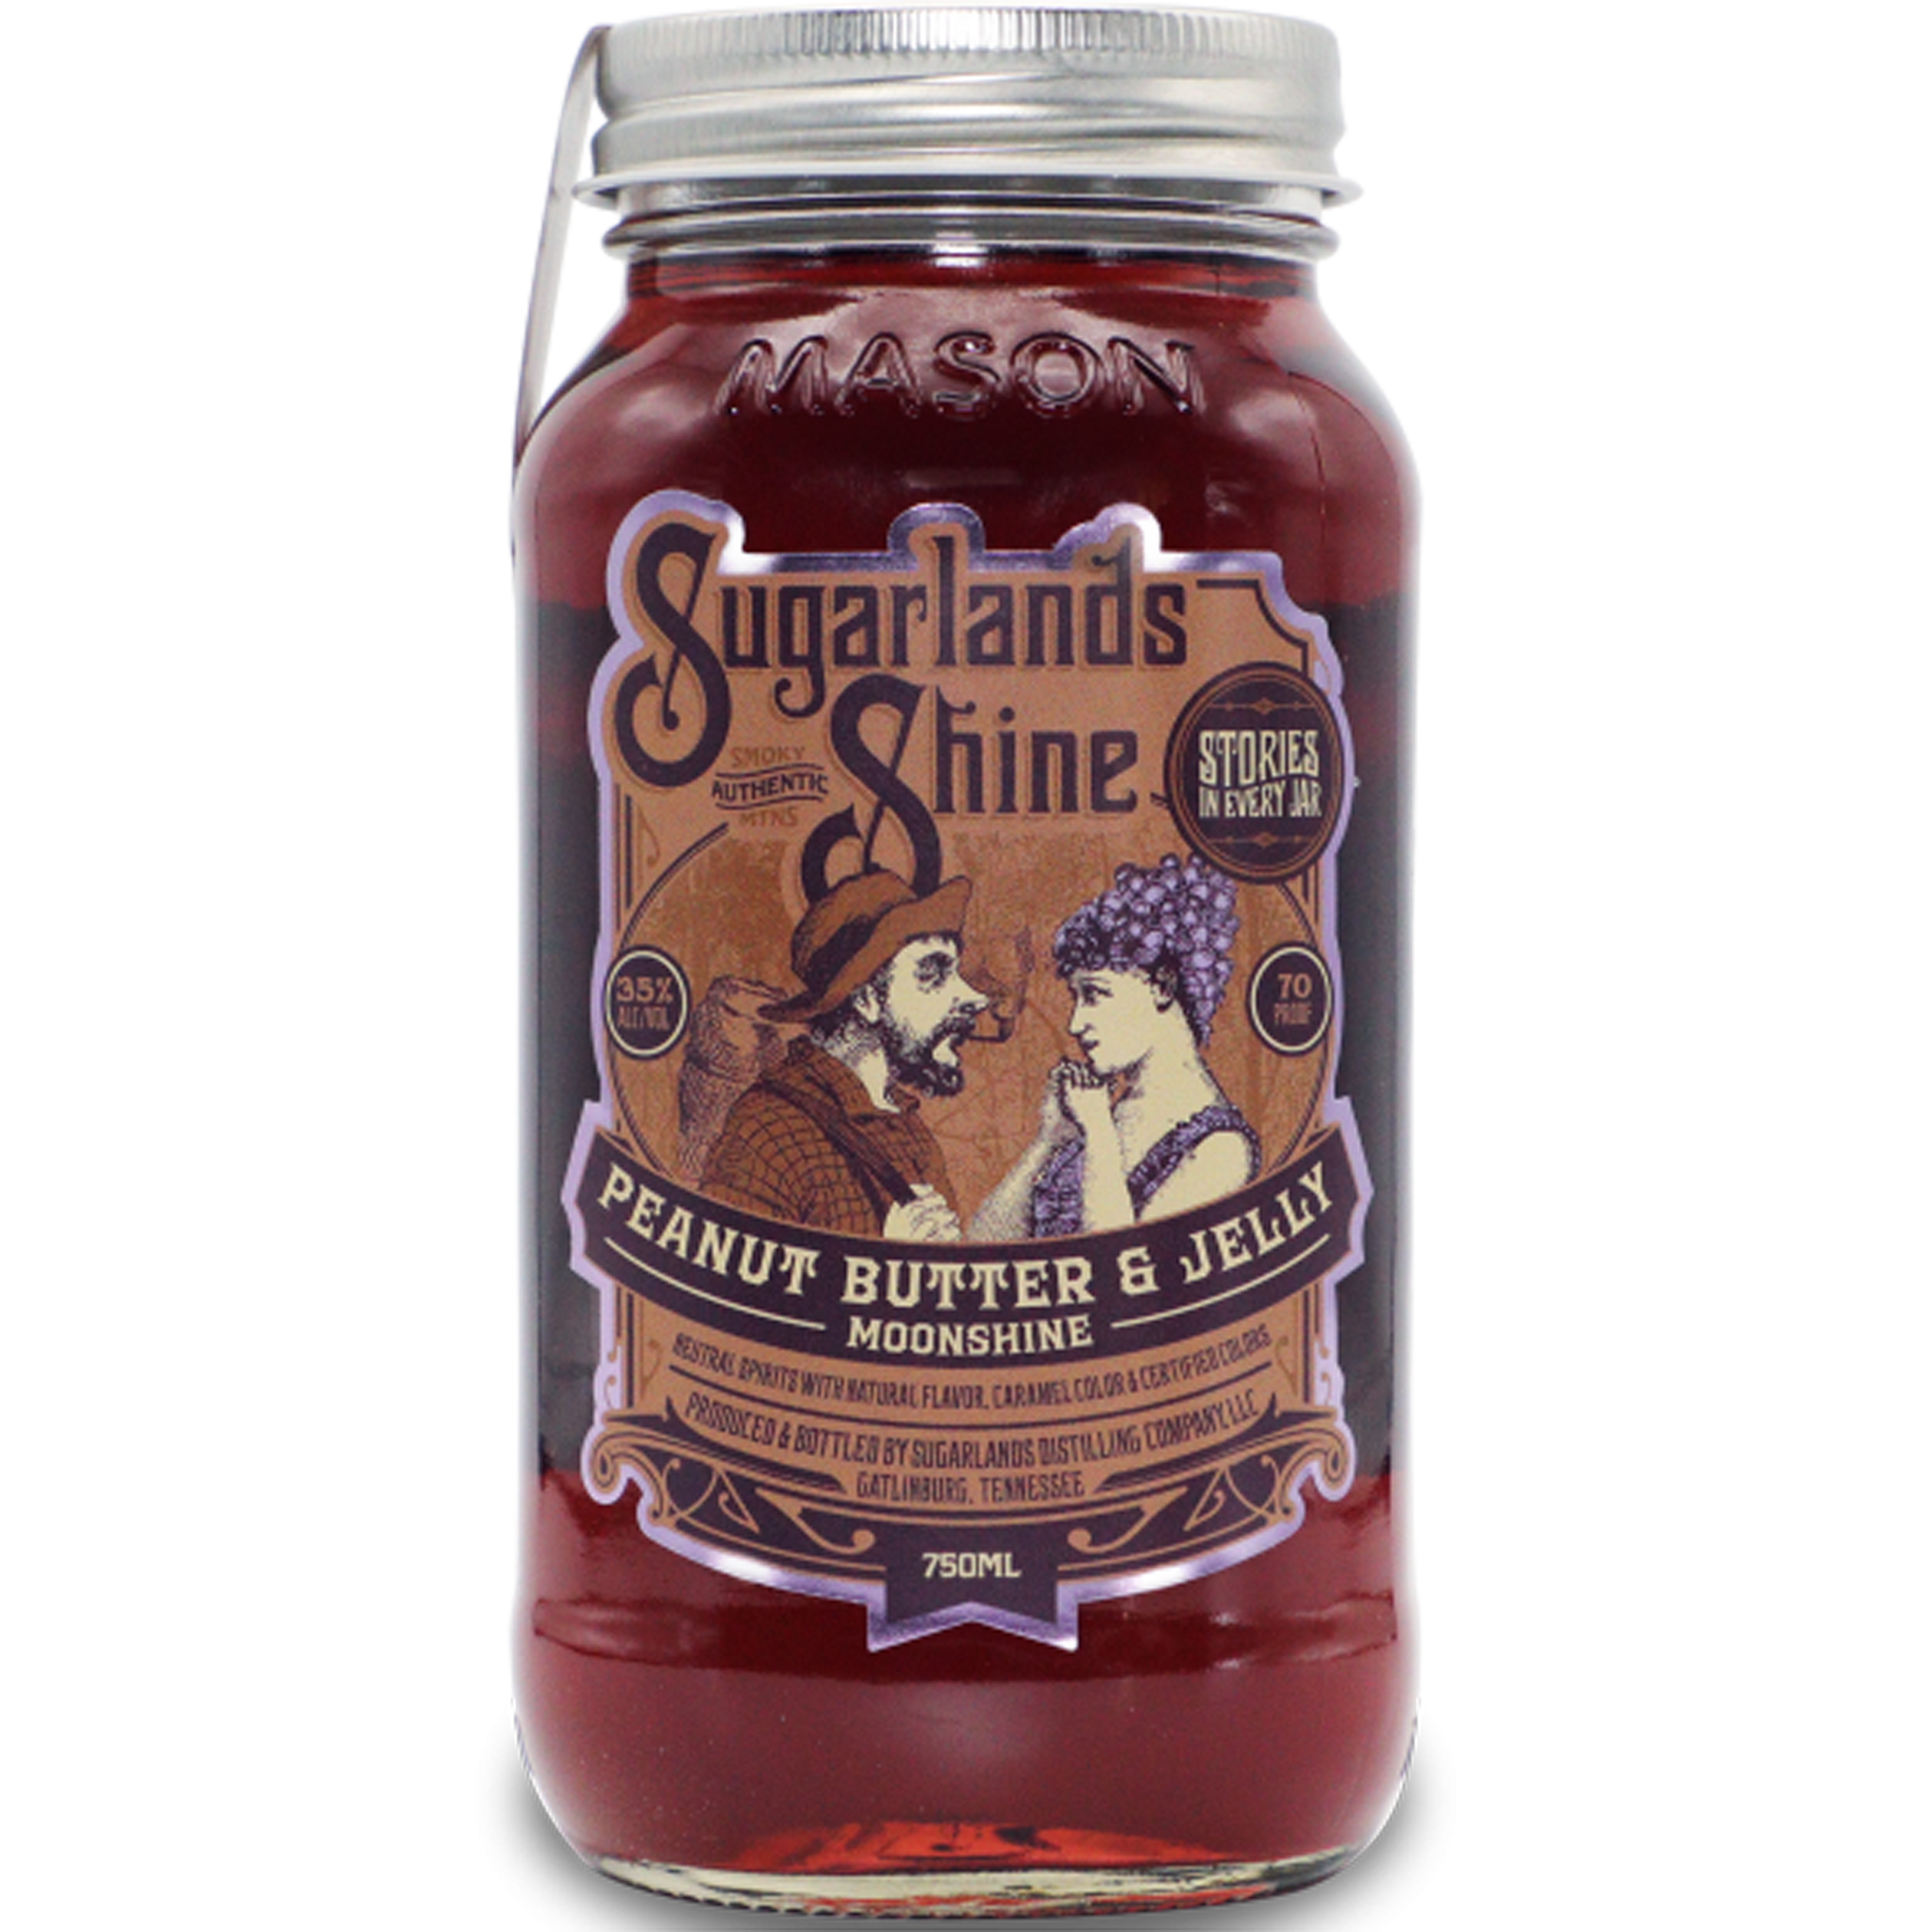 Sugarlands Shine Peanut Butter and Jelly